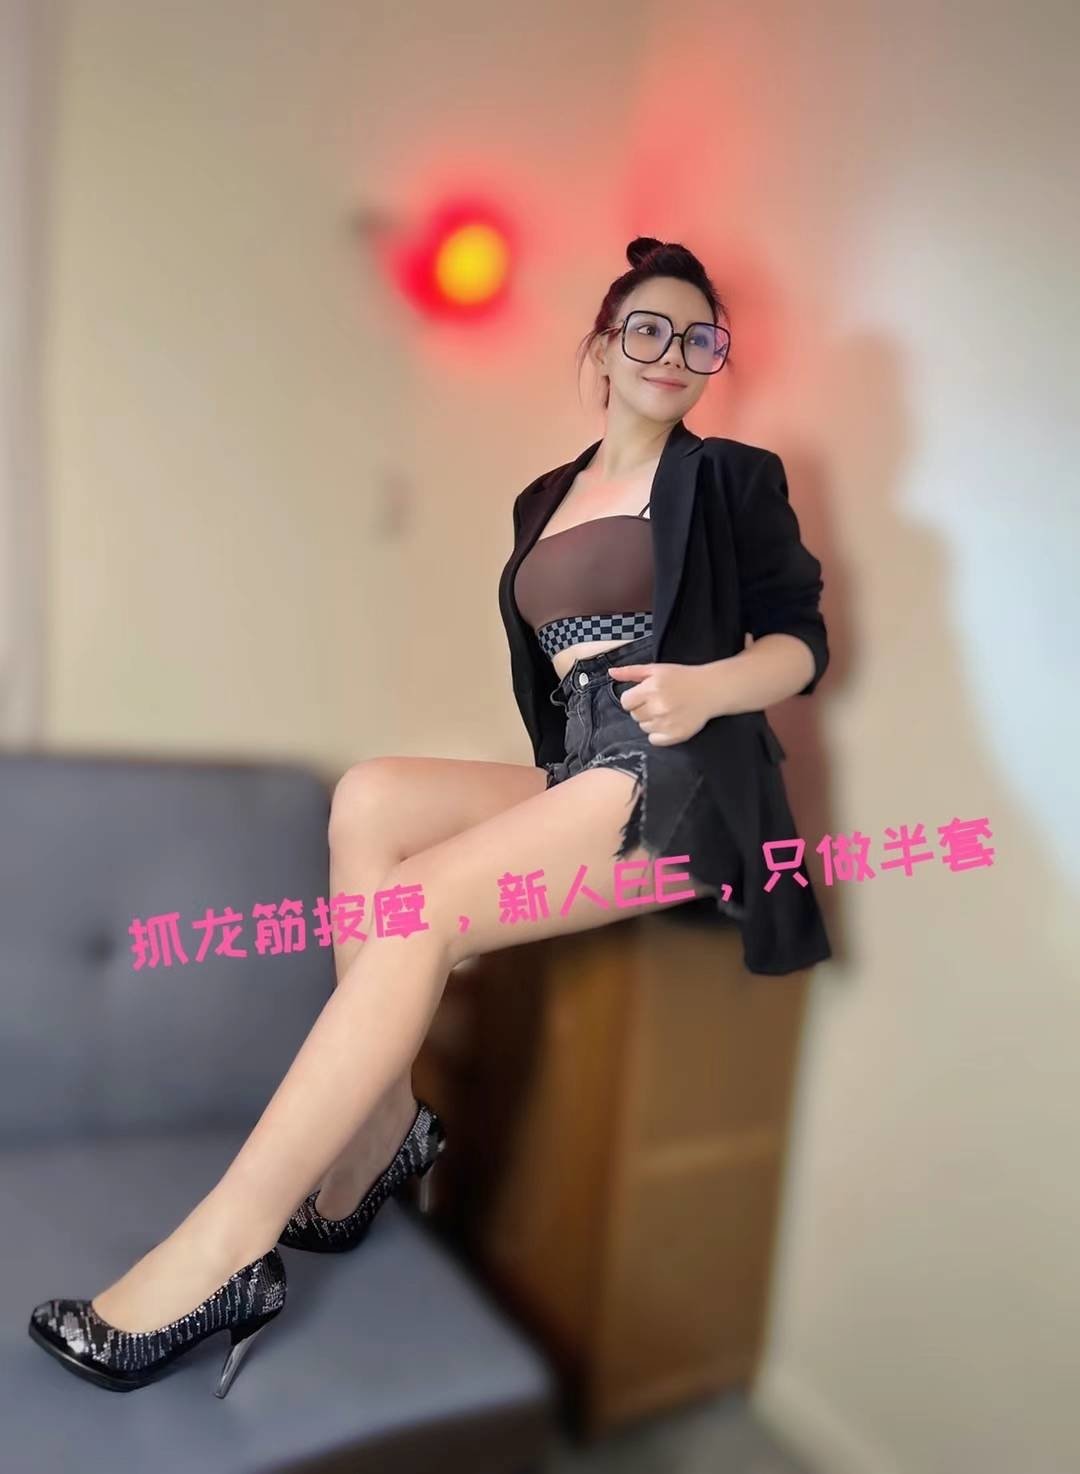 Ee Massage, Chinese masseuse in Beijing